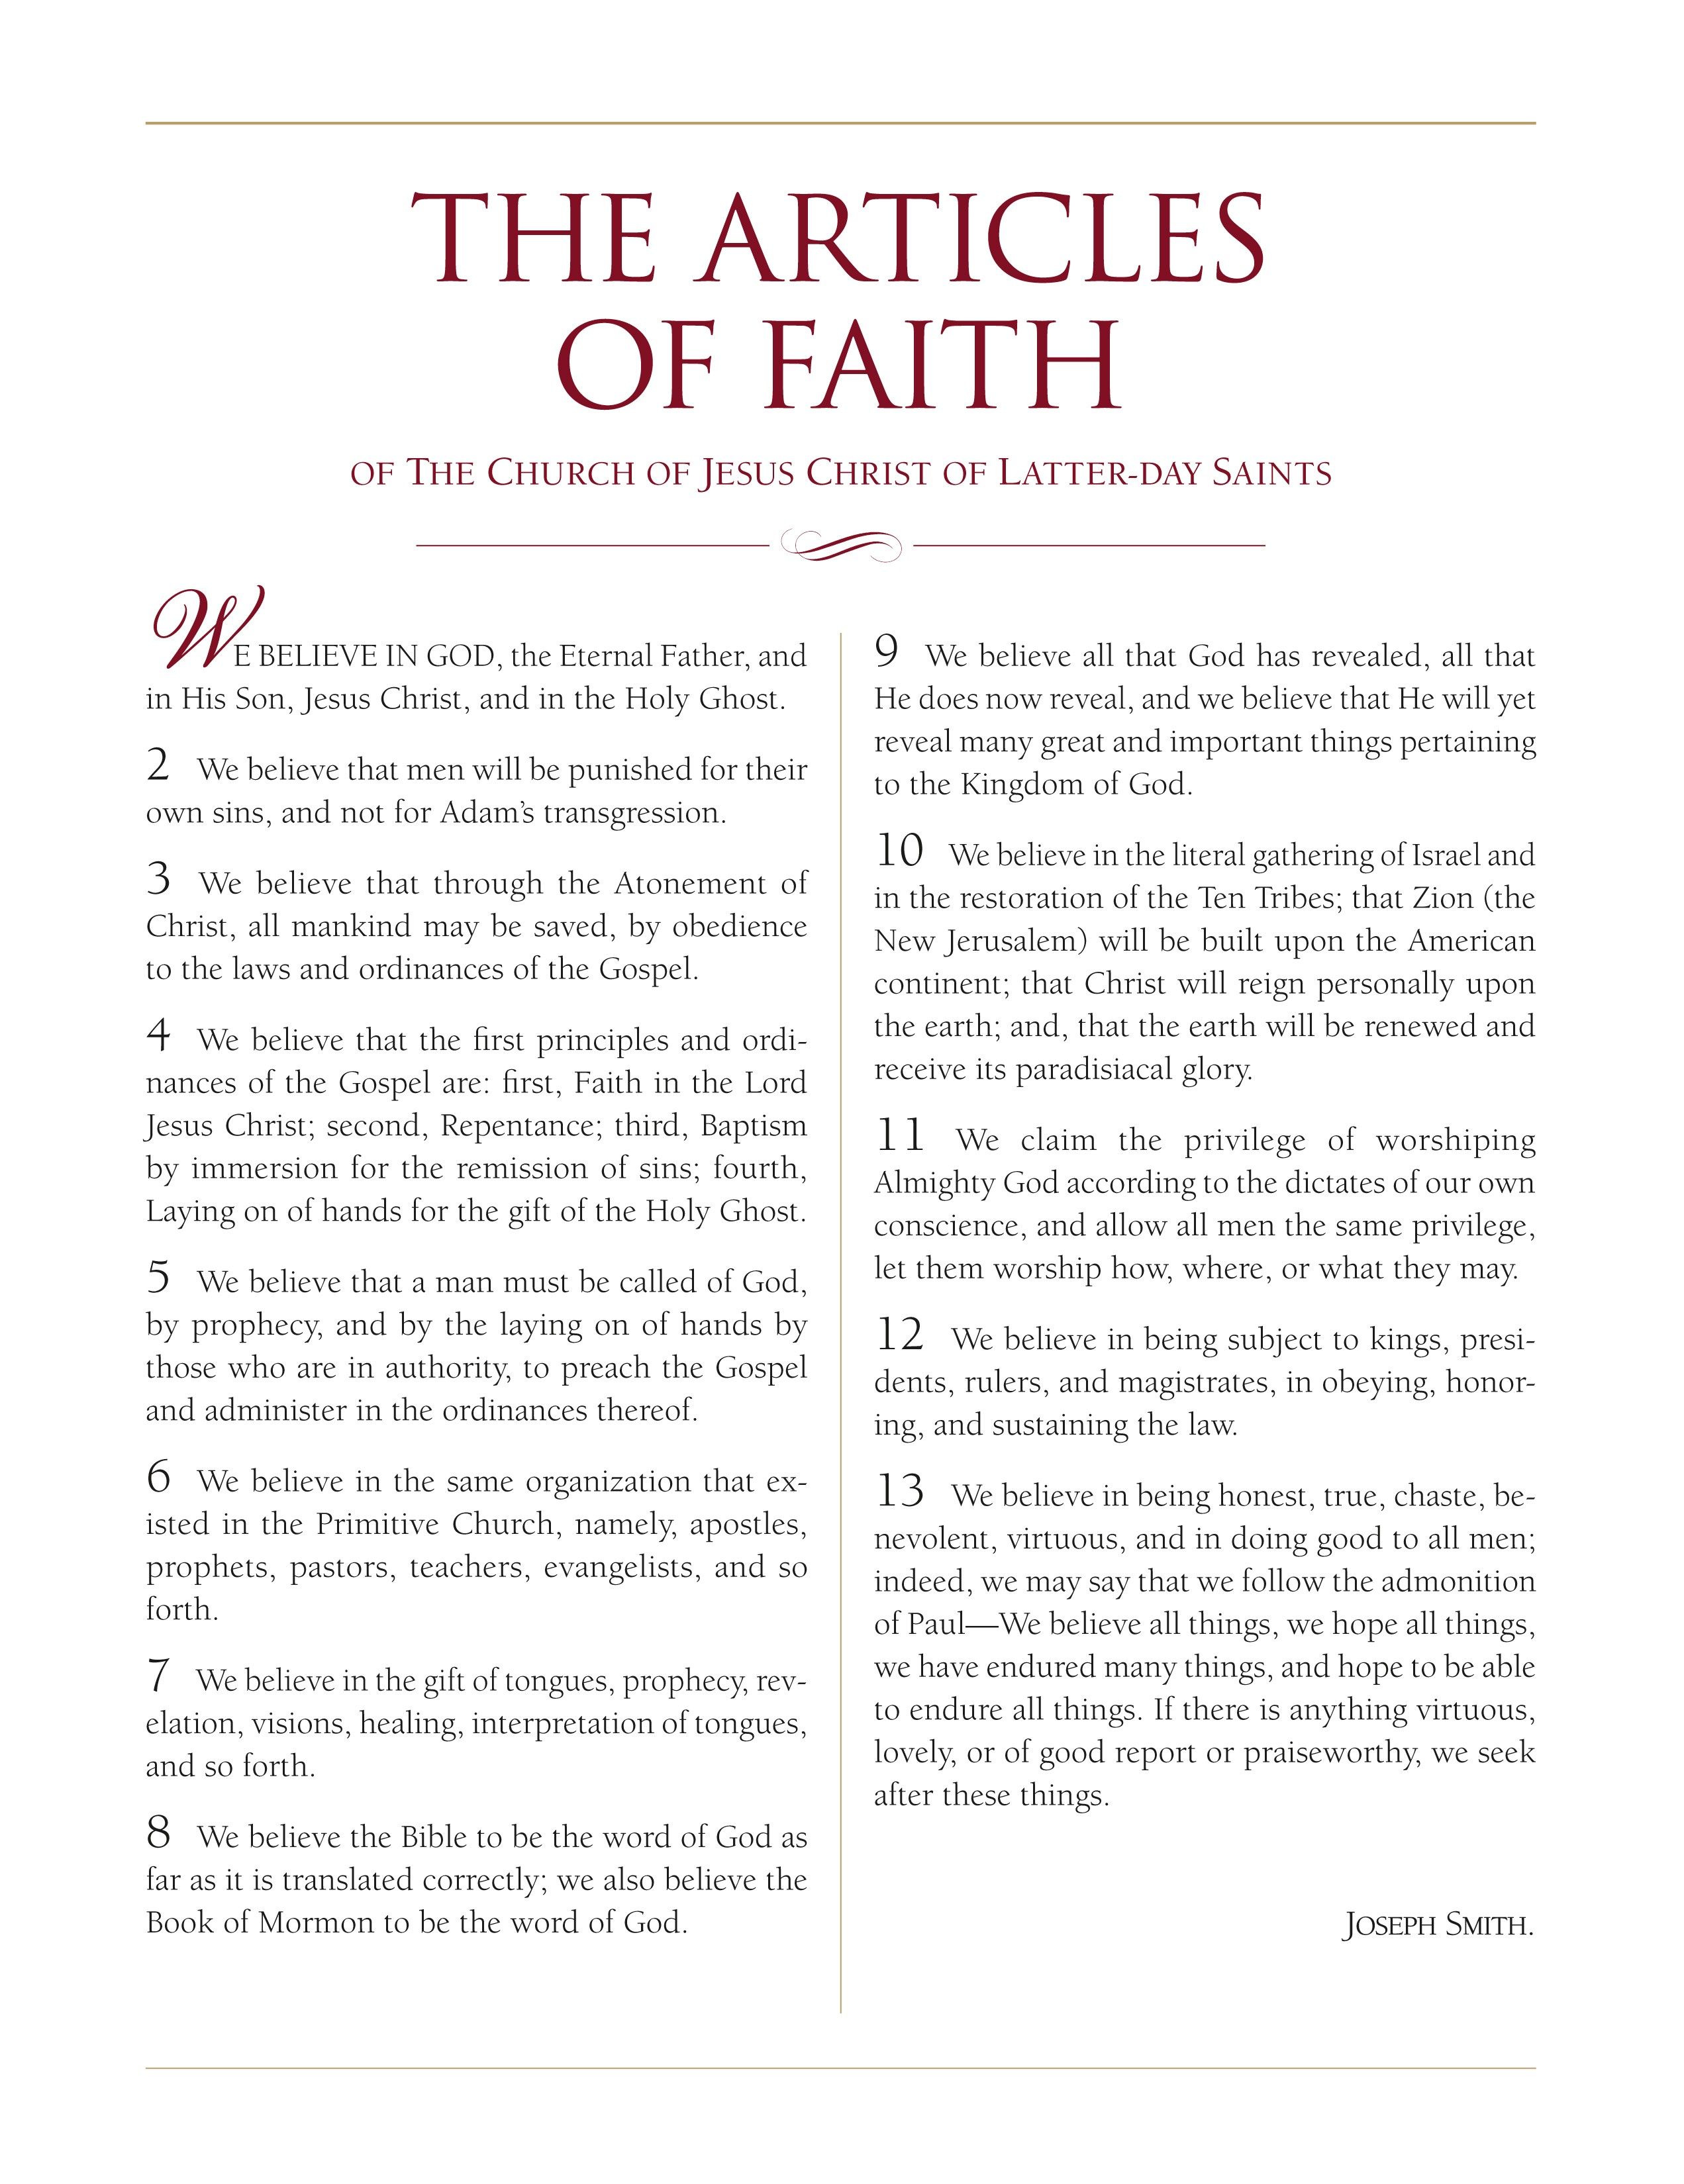 What Are The 18 Articles Of Faith